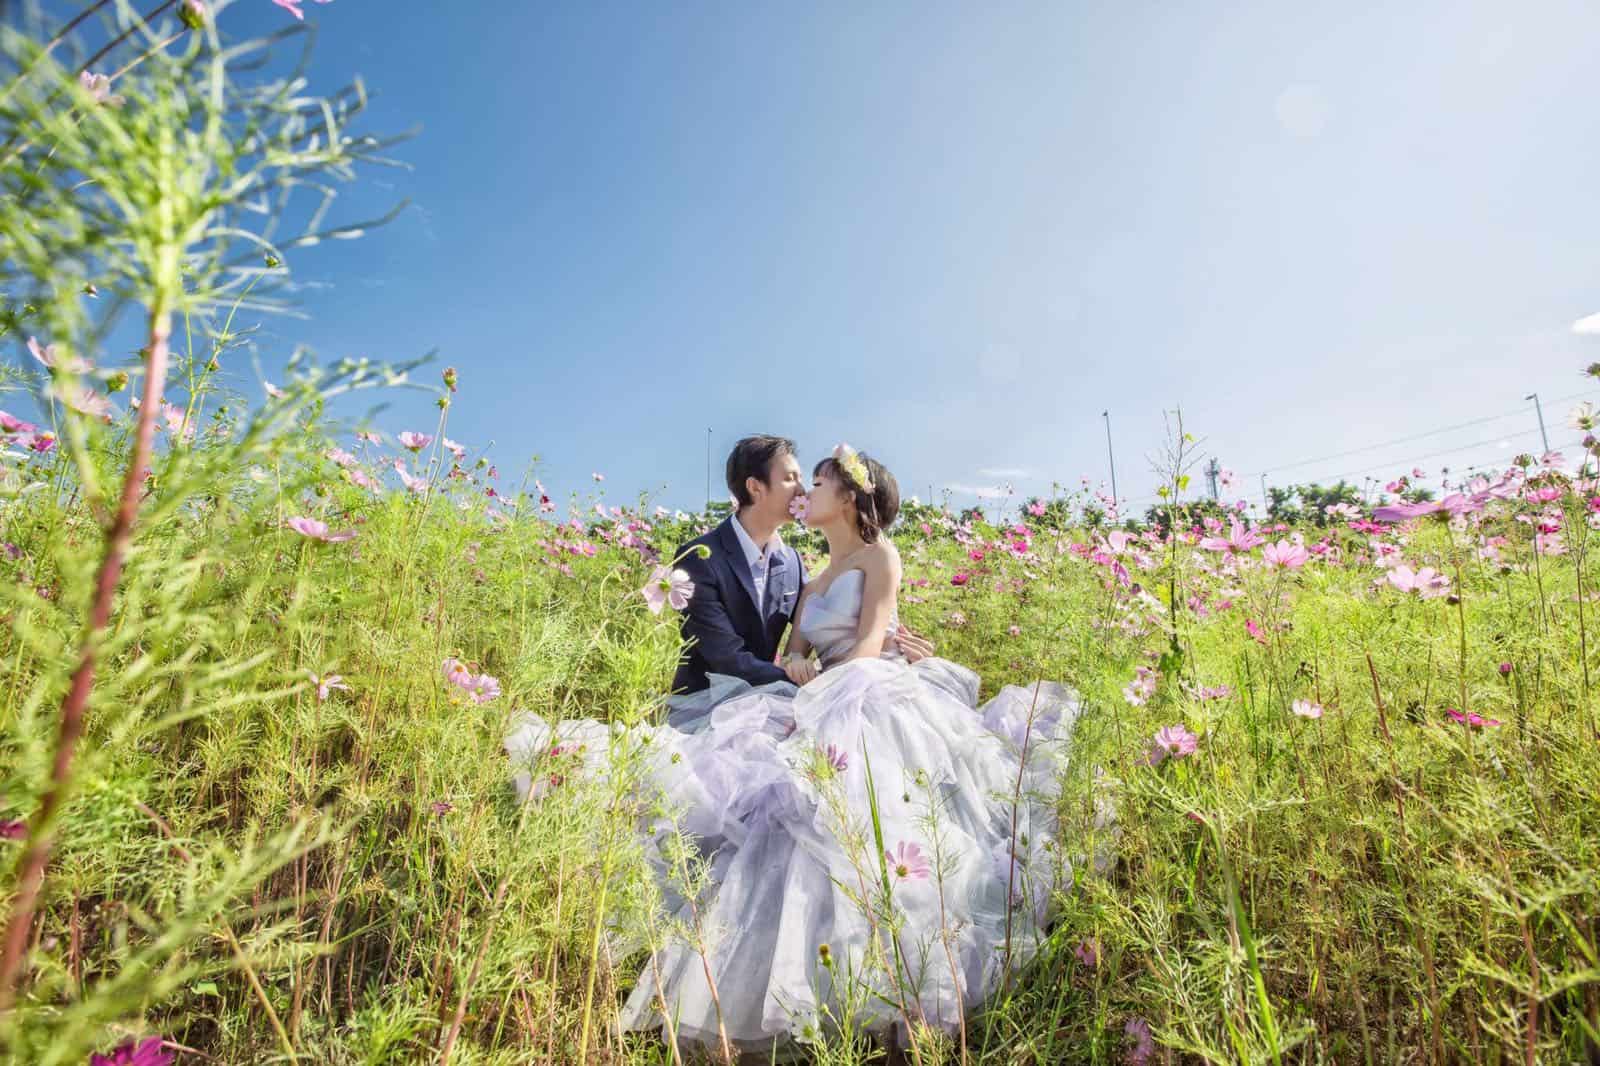 Happy Fabrique Couples: ZhenZhen and Ian